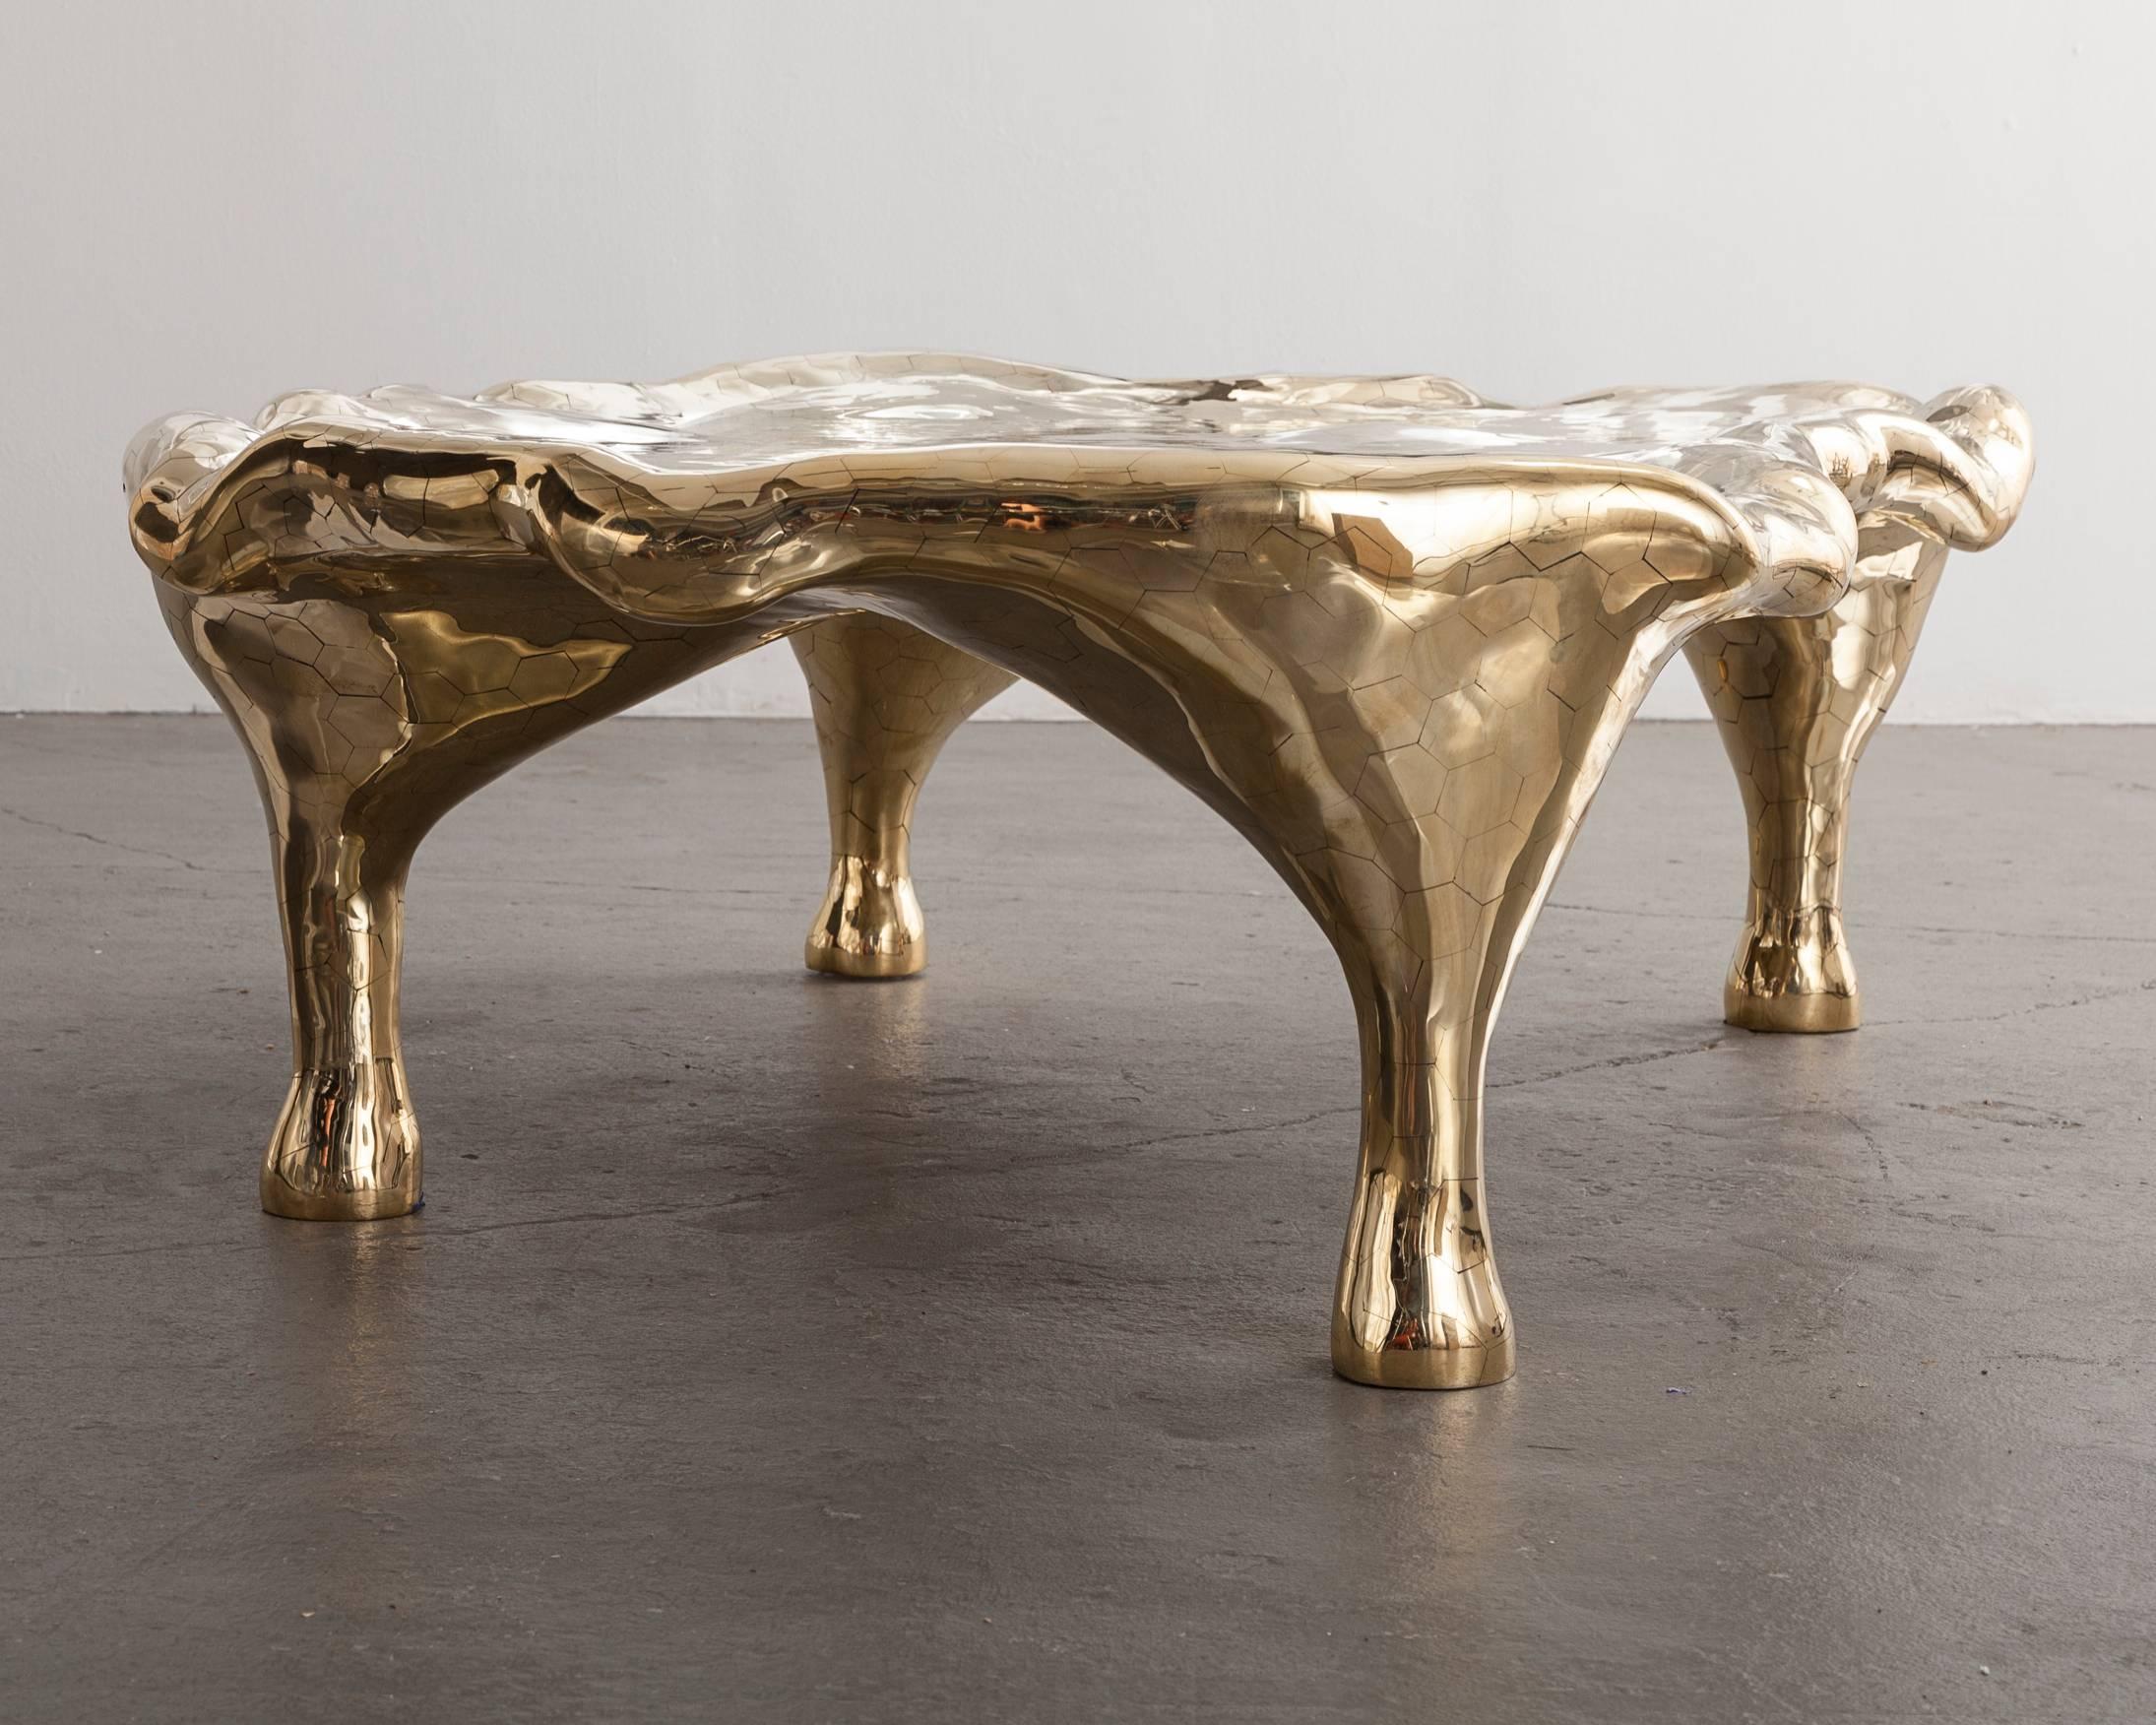 Unique "Stone Gold Steve Austin" Hex coffee table with brass tiles. Designed and made by The Haas Brothers, Los Angeles, CA, 2015. 

Available for custom commission.